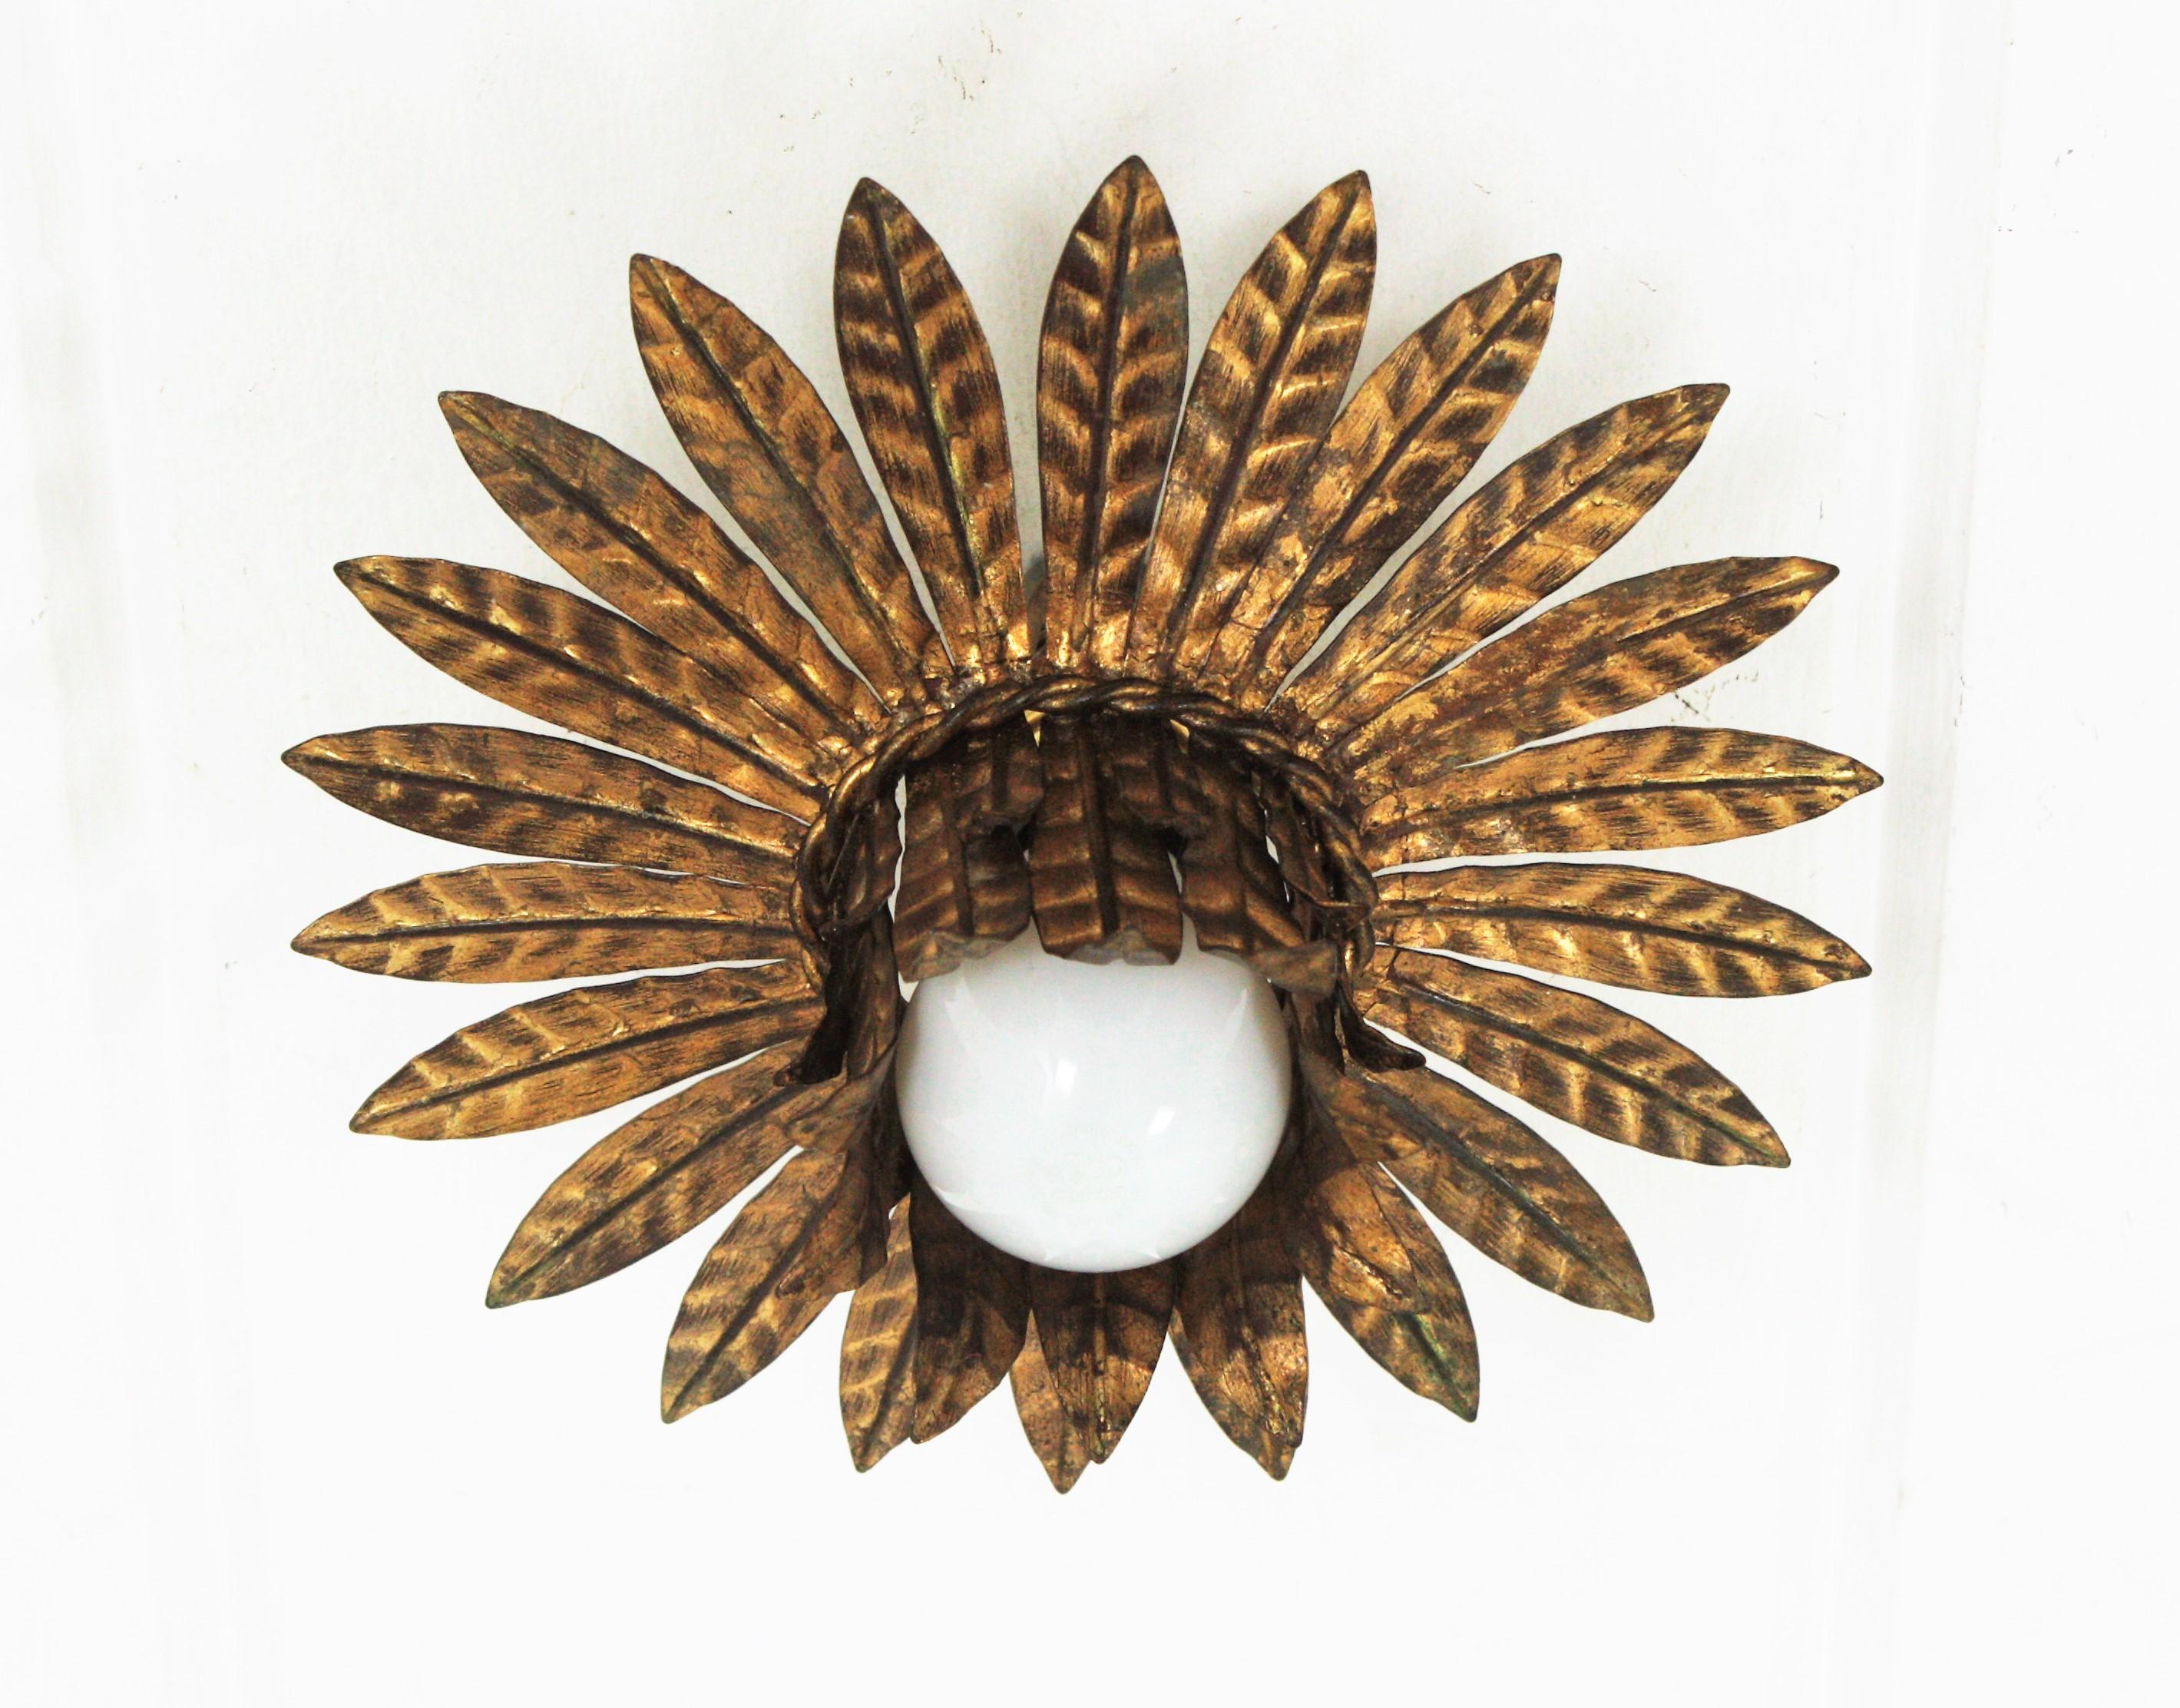 French Leaves Bouquet Crown Ceiling Light Fixture in Gilt Iron, 1940s For Sale 10